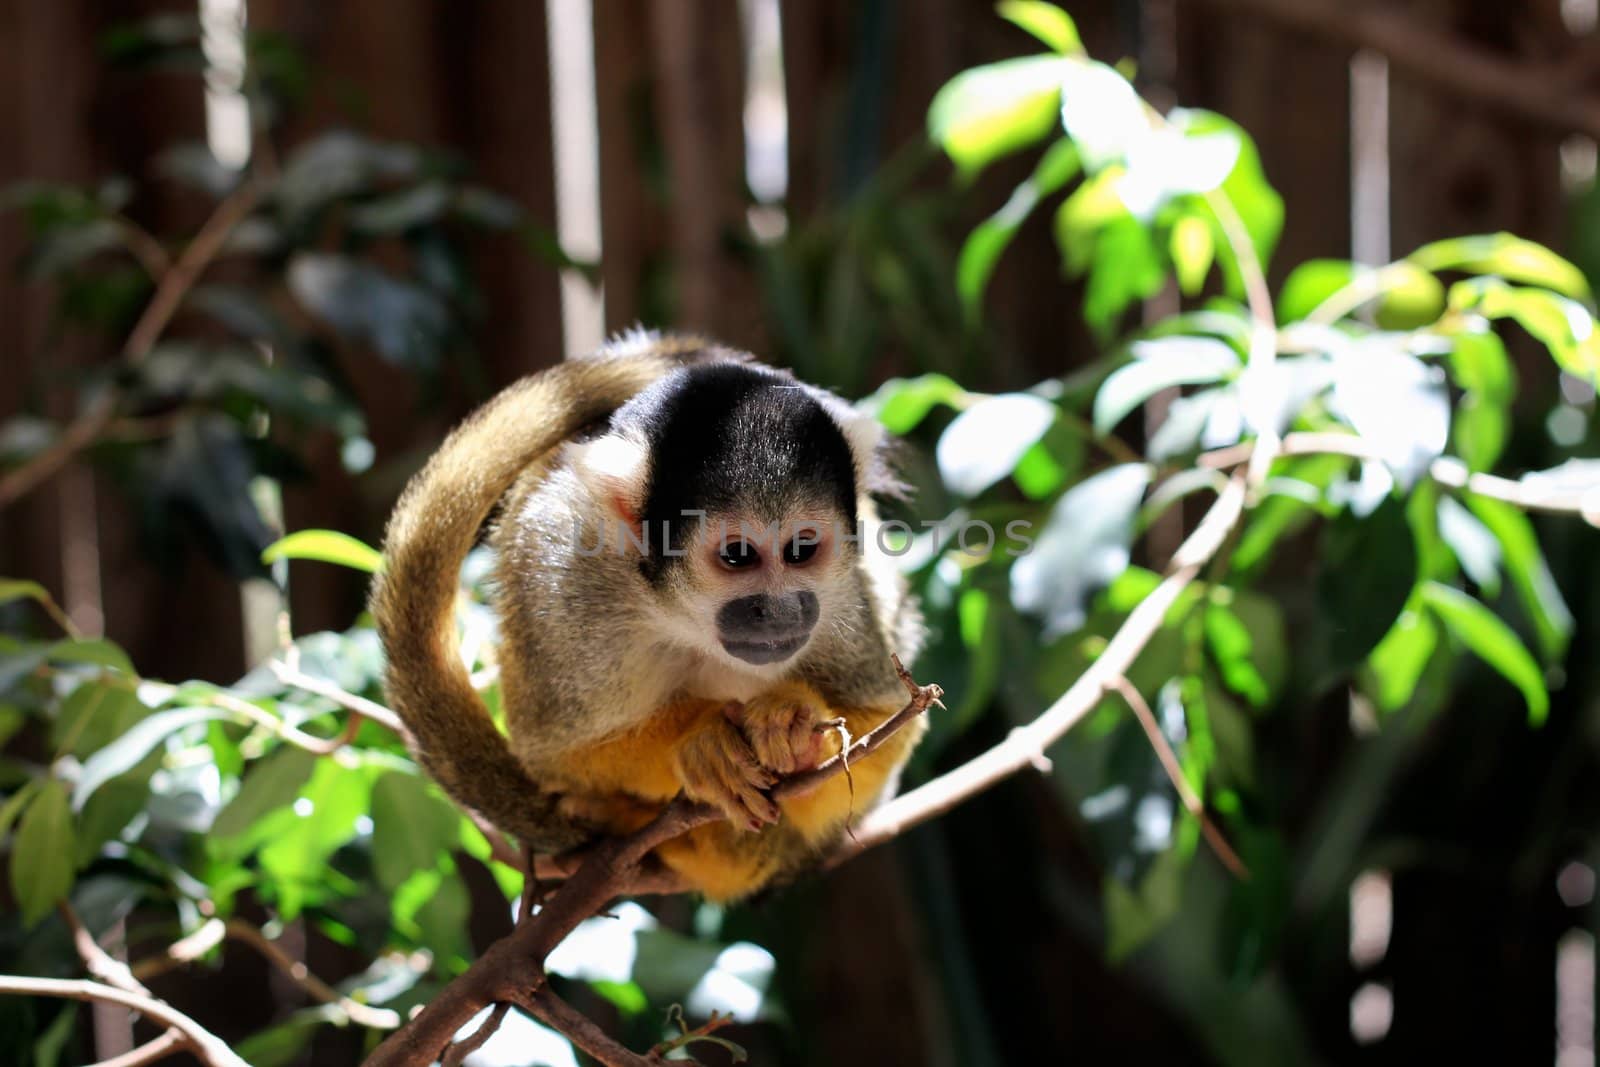 Common Marmoset (Callithrix jacchus jacchus) sitting on a Branch at World of Birds